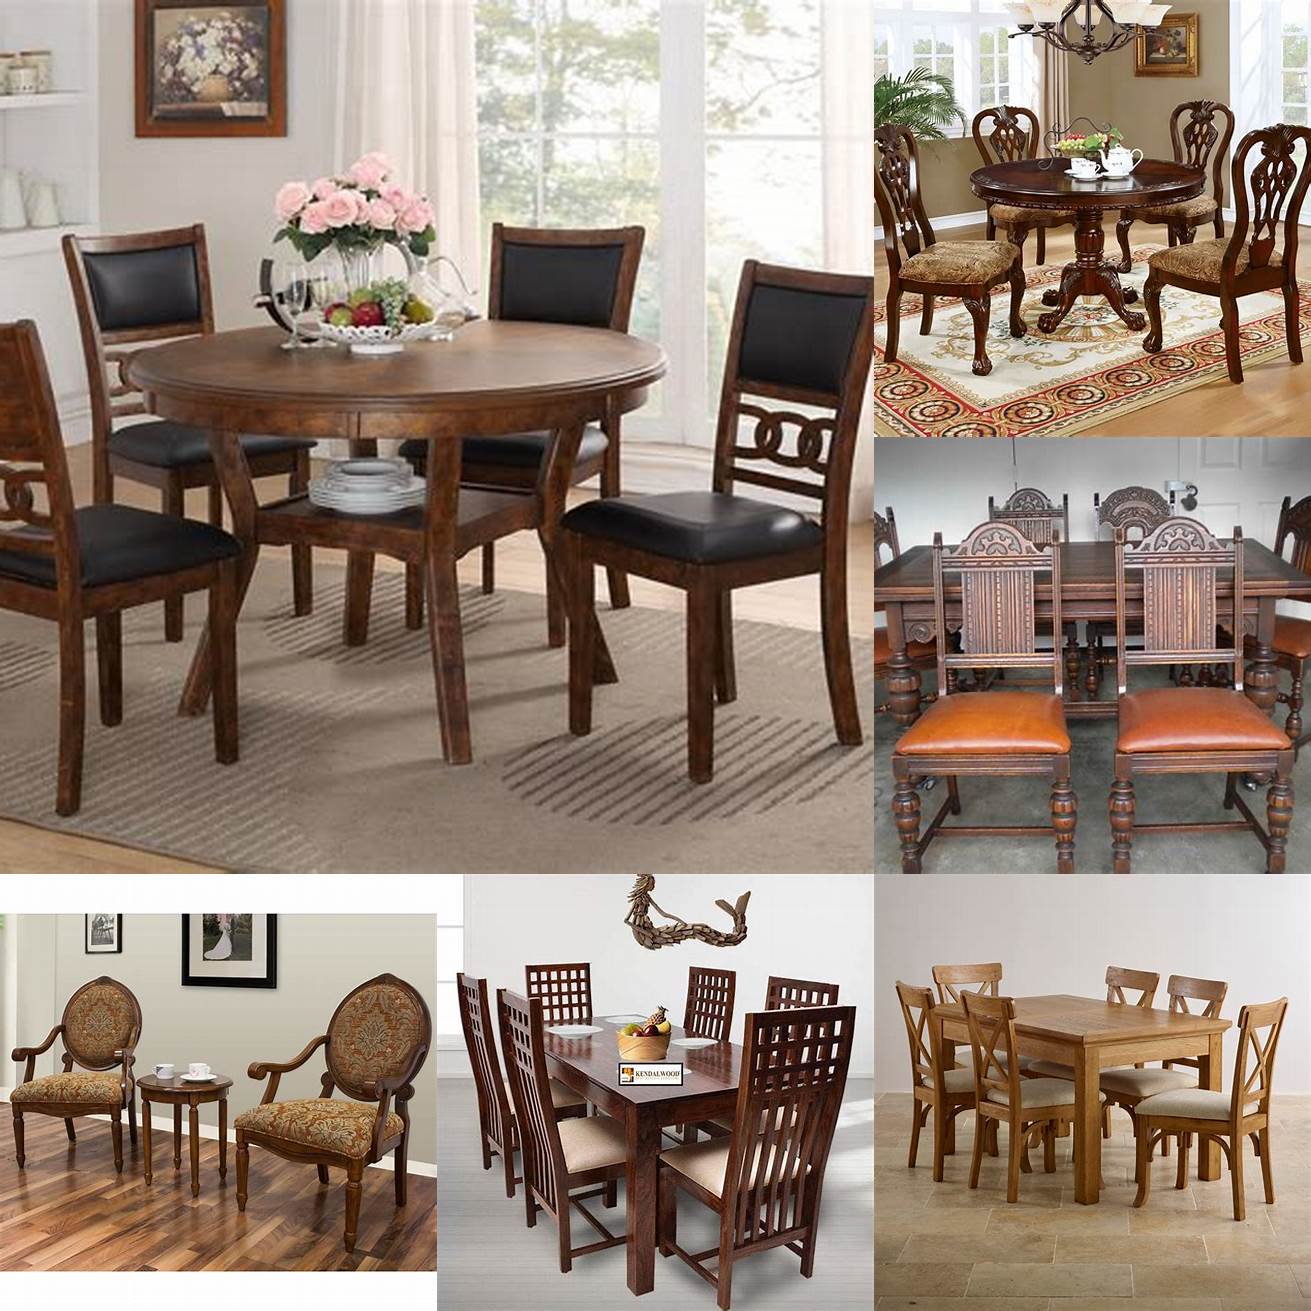 Classic Wooden Chair and Table Set